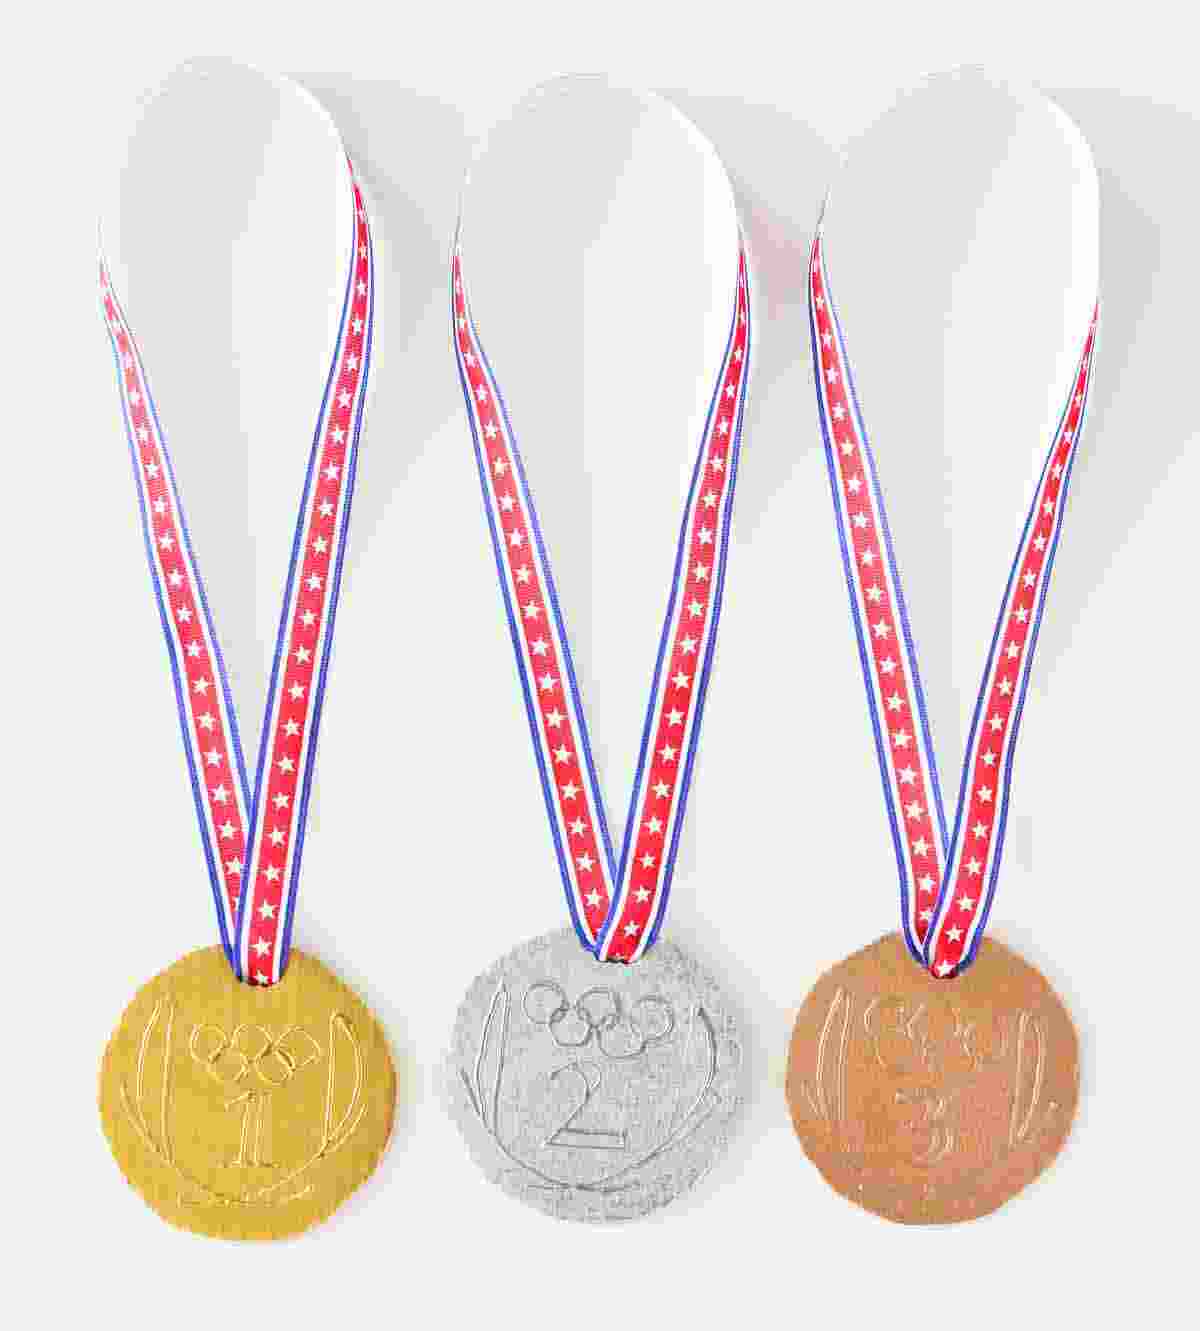 DIY Olympic Medals